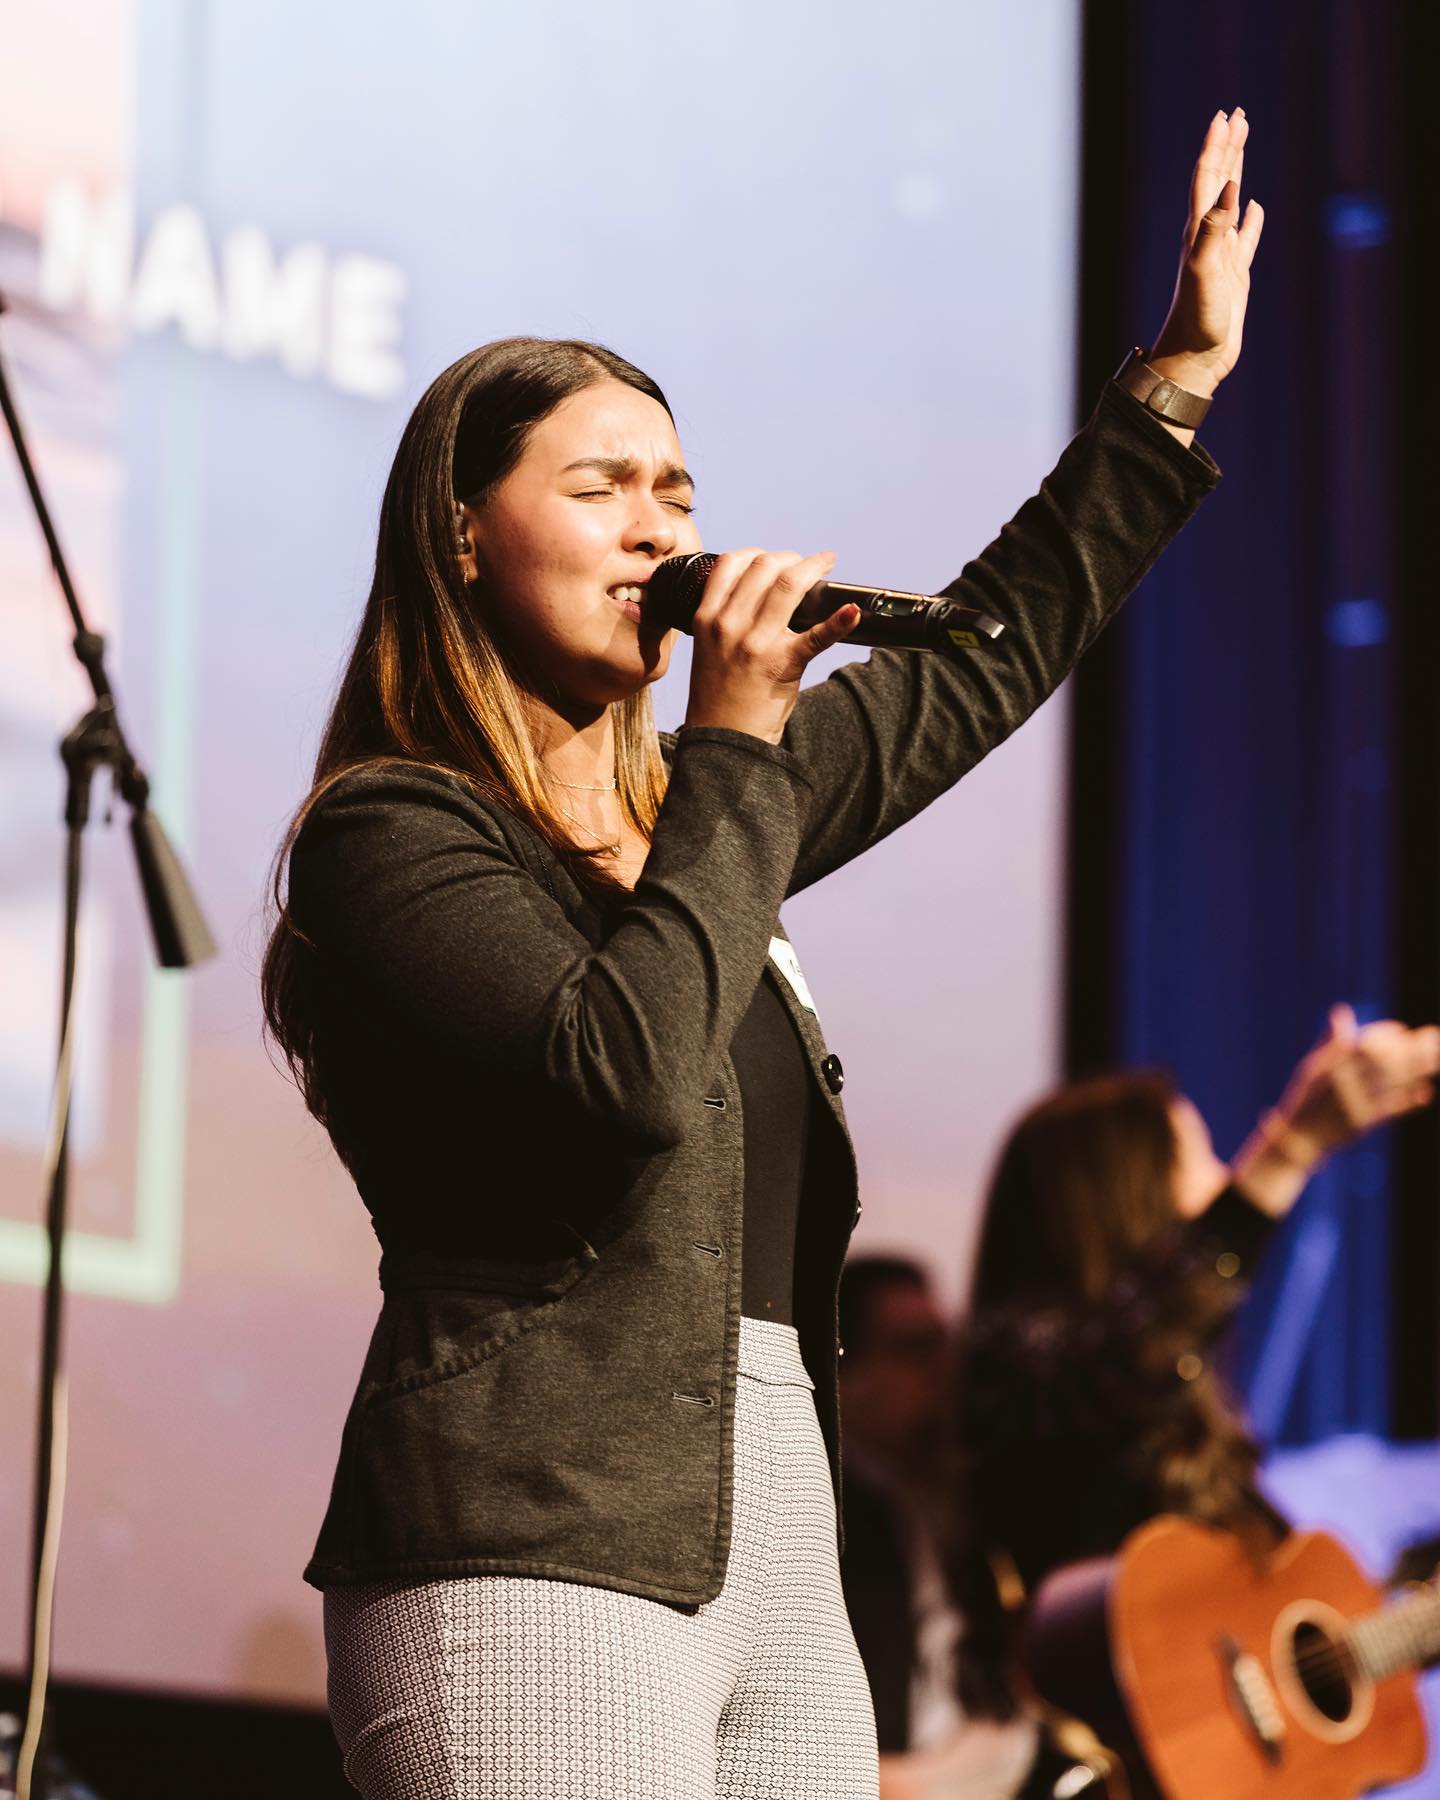 When Jesus is lifted up, He lifts up heavy hearts! We can’t wait to worship with you this Sunday!